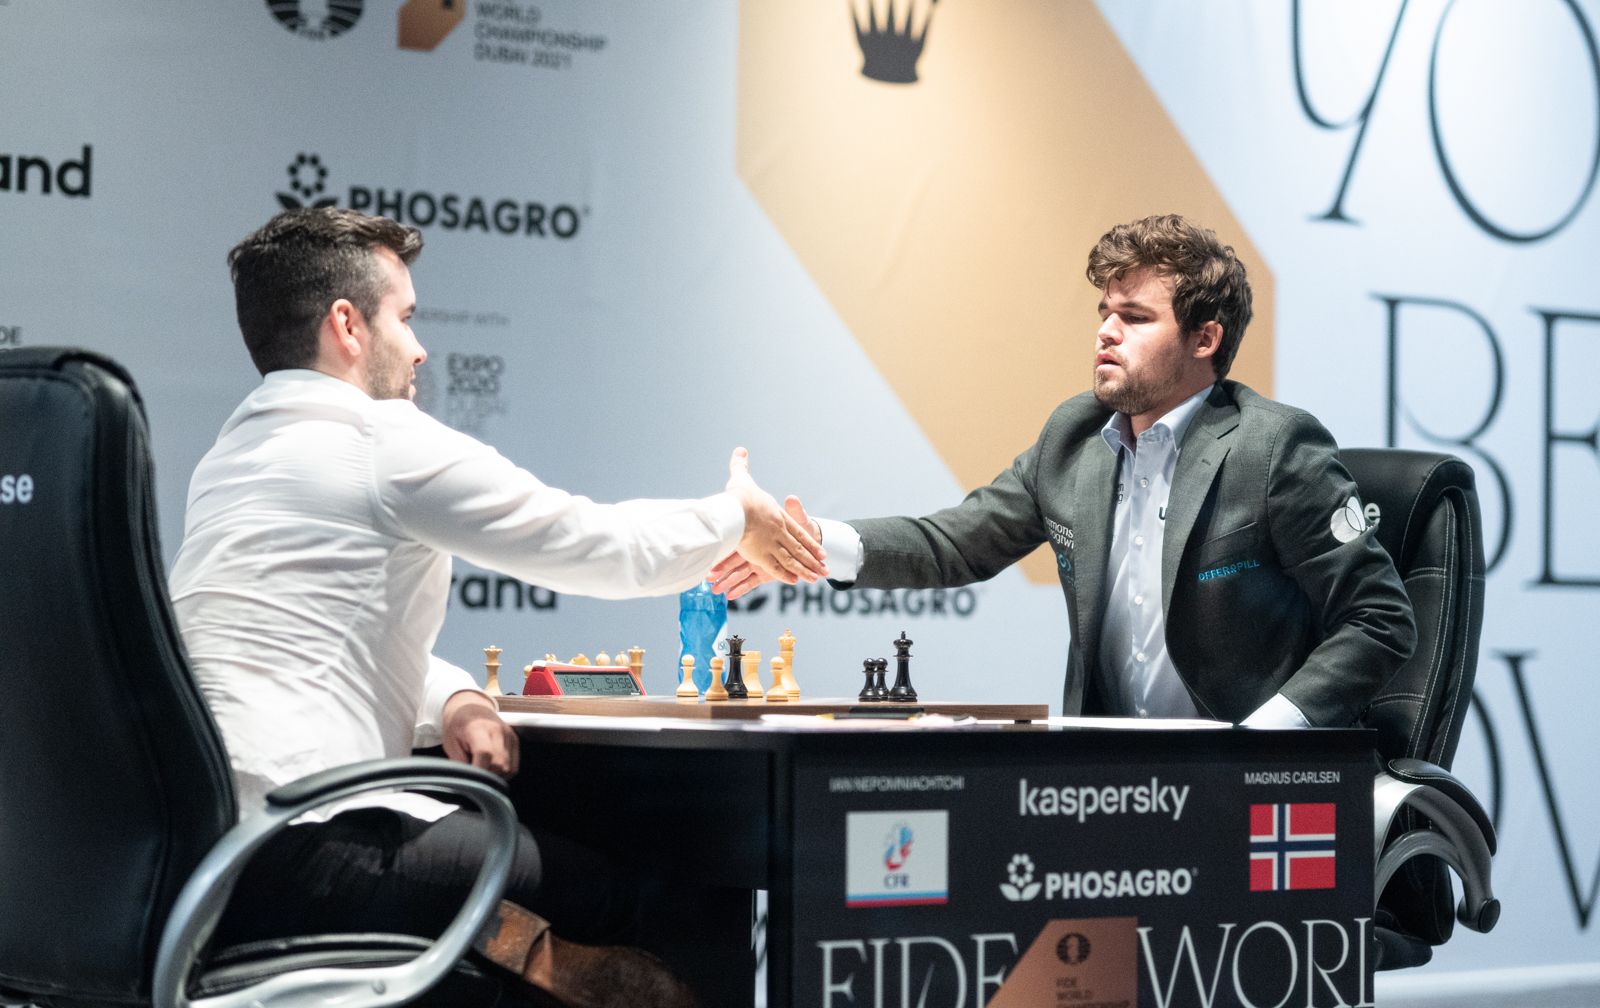 Carlsen One Win From Victory After Drawing FIDE World Chess